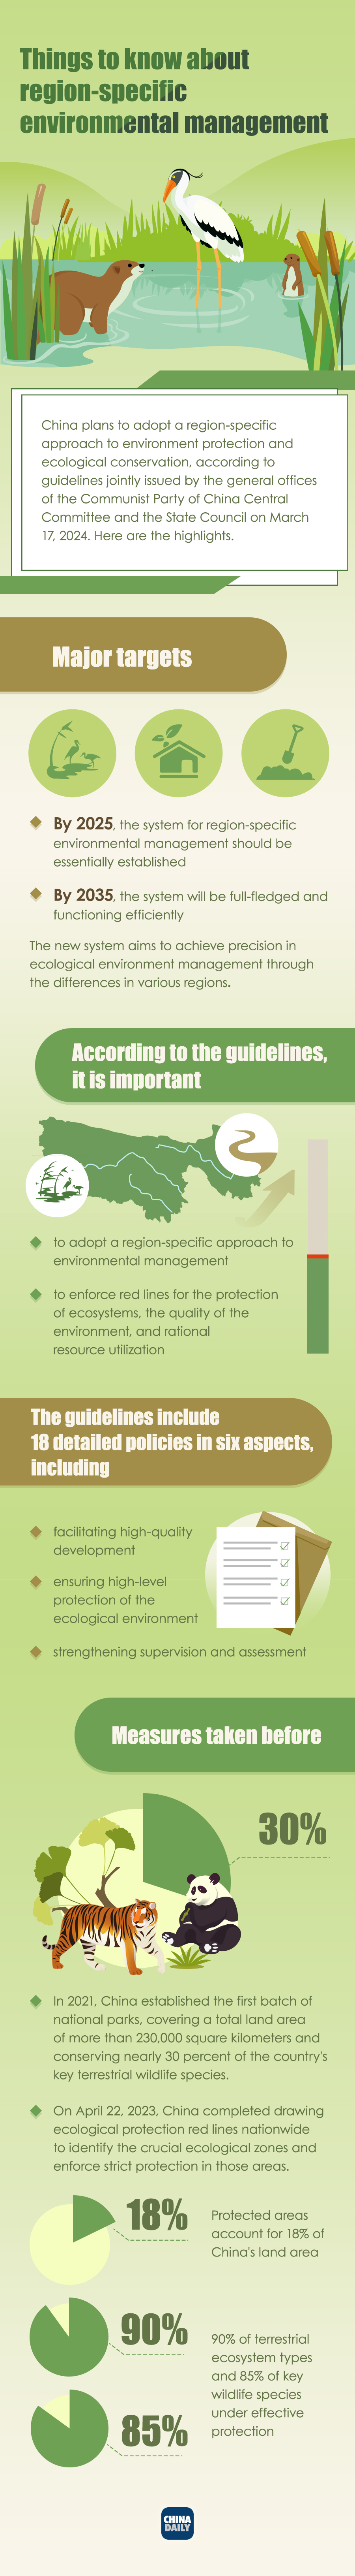 Infographic: Things to know about region-specific environmental management